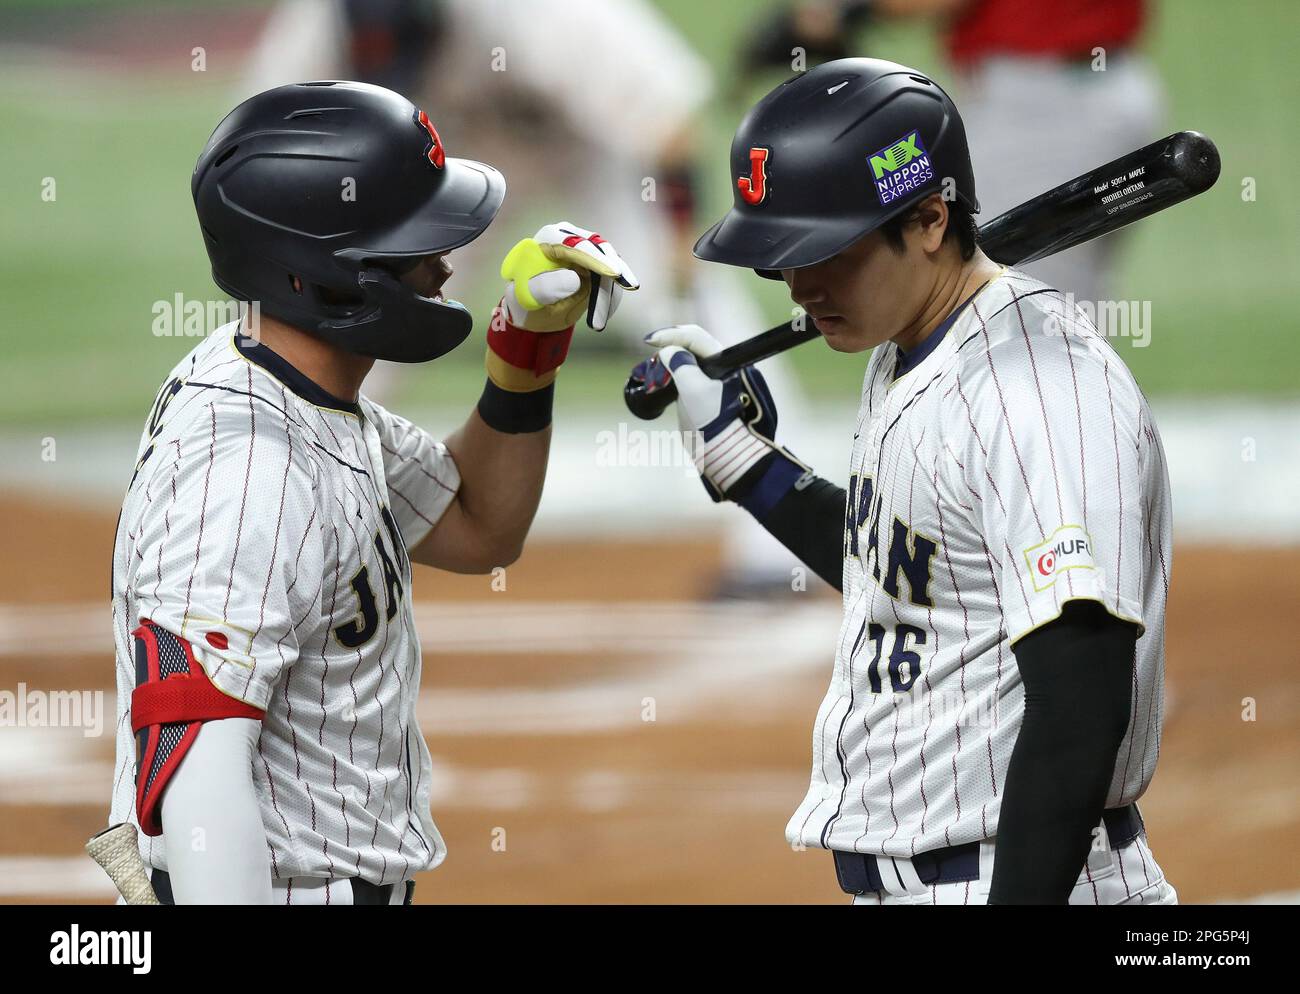 Miami, United States. 20th Mar, 2023. Japan's Lars Nootbaar (23) talks to Shohei Ohtani (16) after his at bat in the first inning of the 2023 World Baseball Classic semifinal game against Mexico in Miami, Florida on Monday, March 20, 2023. Photo by Aaron Josefczyk/UPI Credit: UPI/Alamy Live News Stock Photo